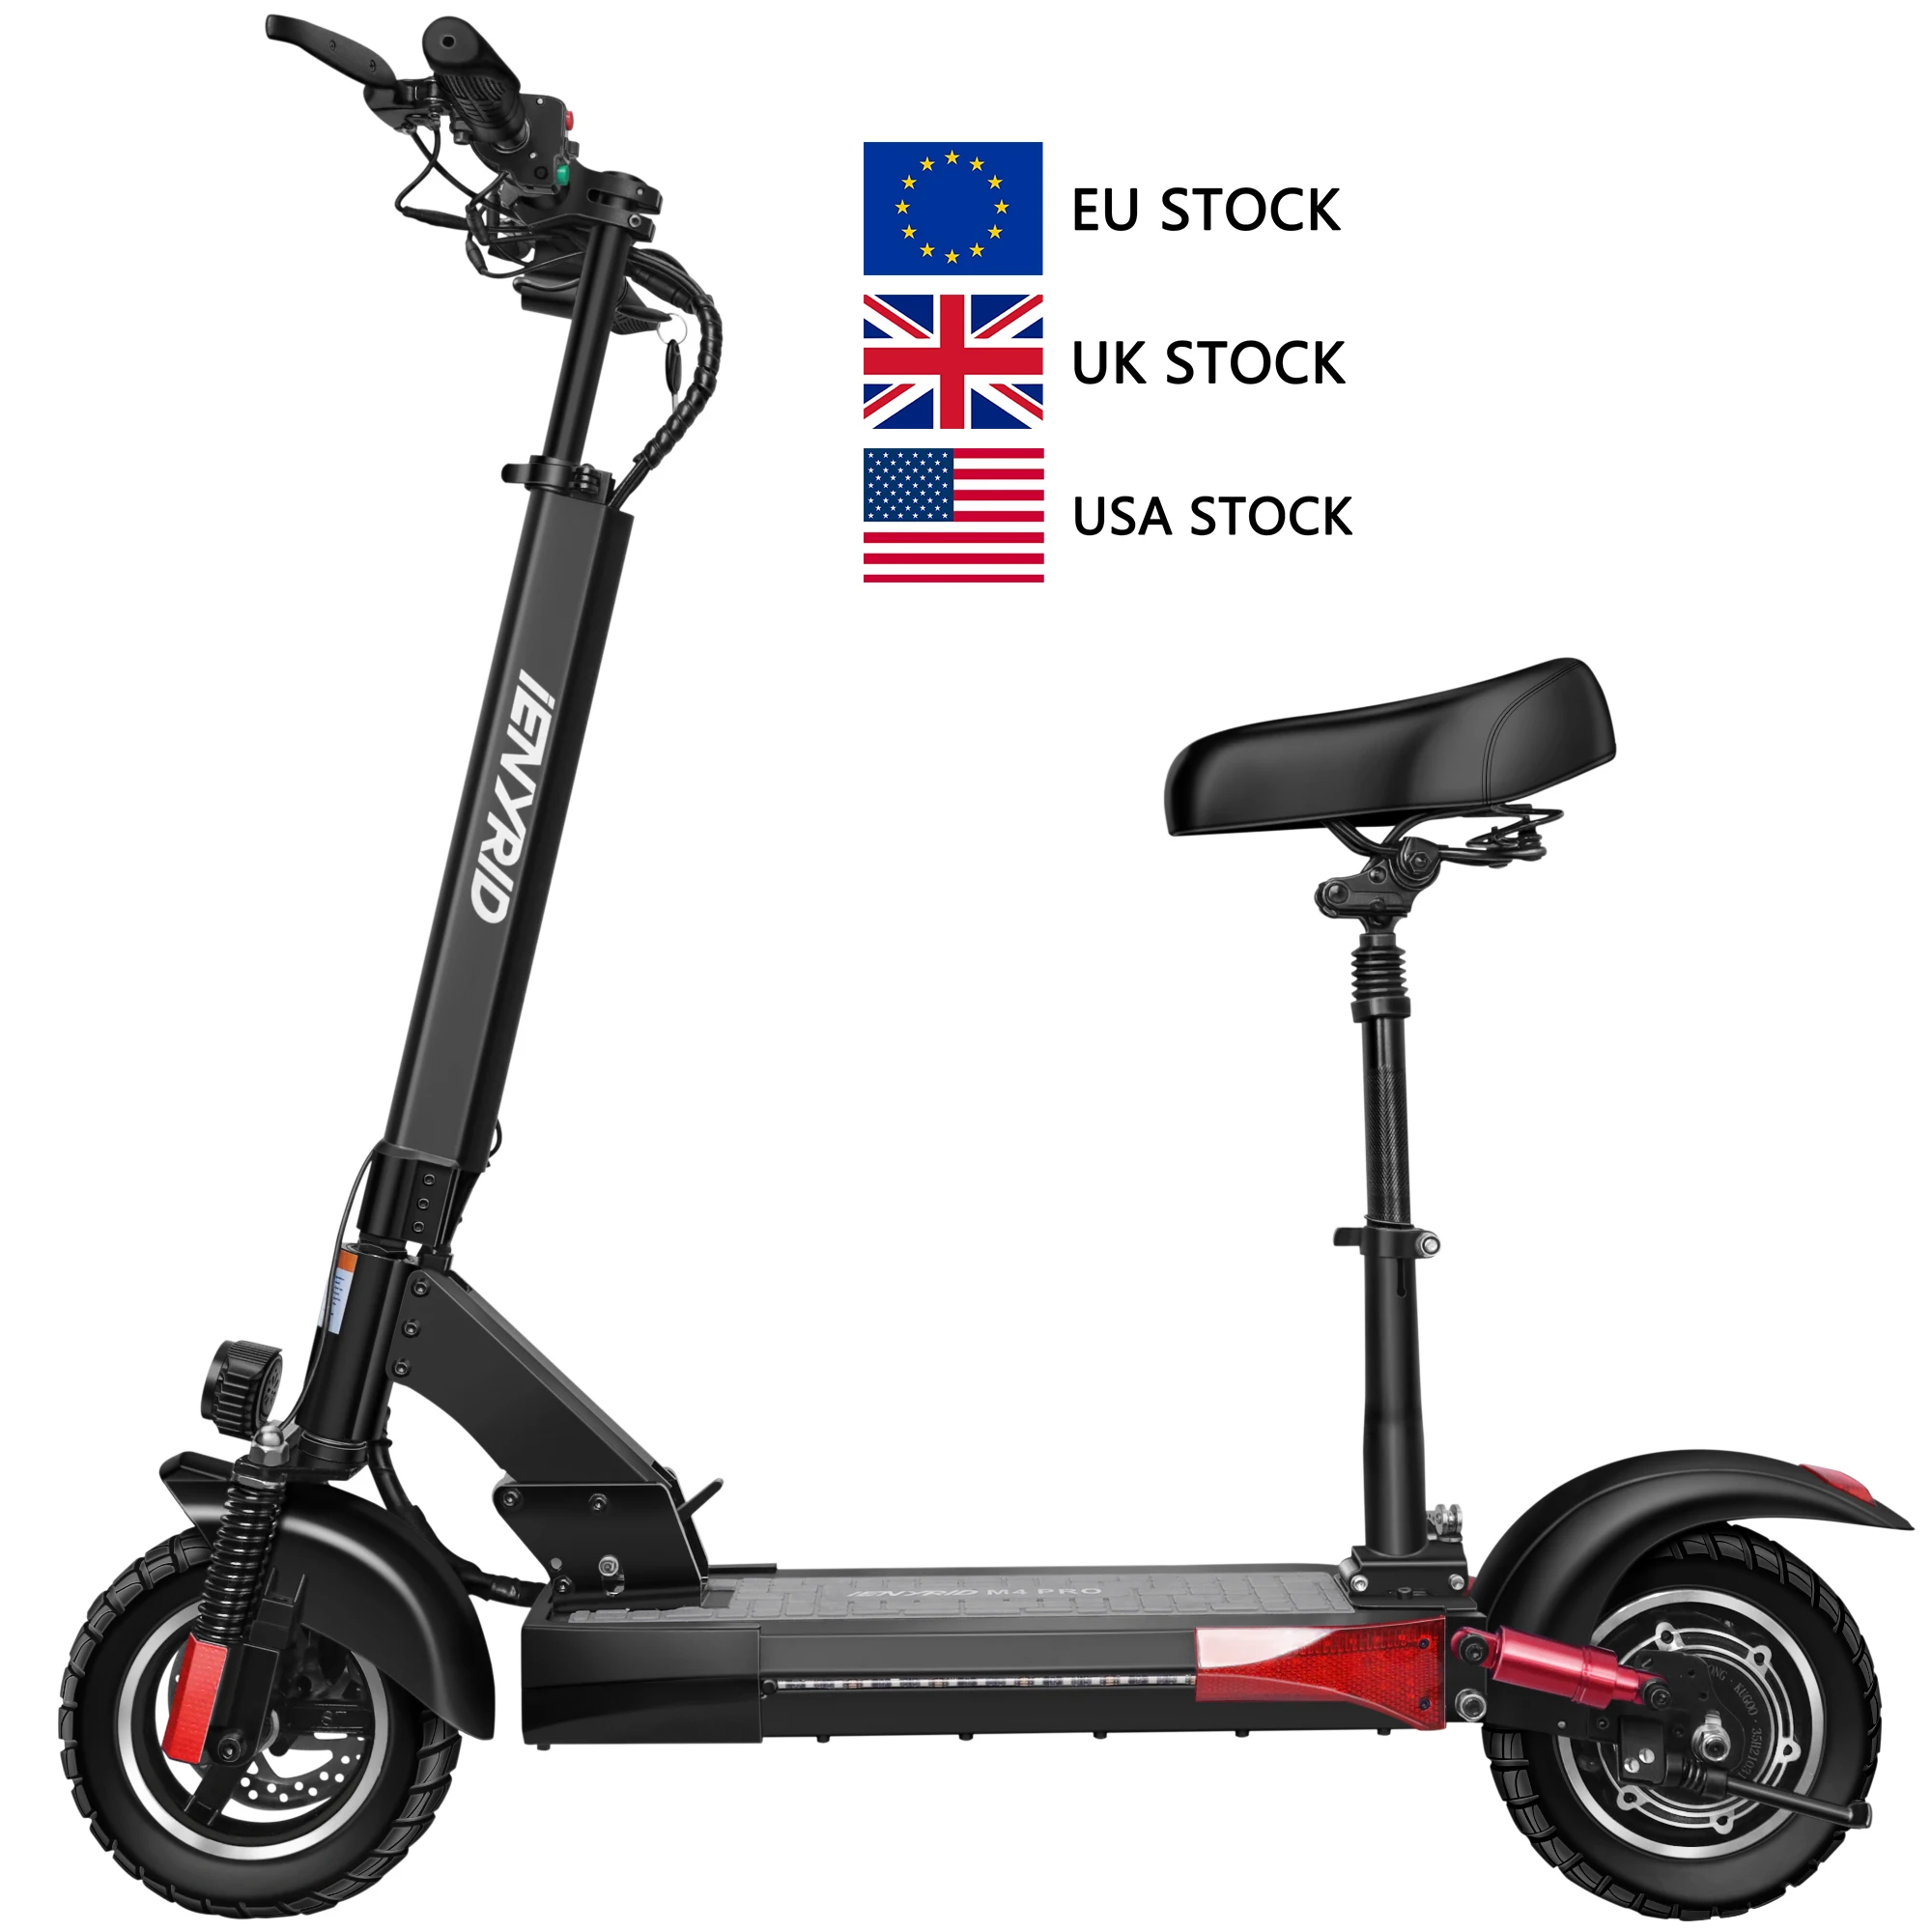 New arrival!!! iENYRID M4 PRO 500w Motor 16ah electric scooters 48v scooter with seat, Black